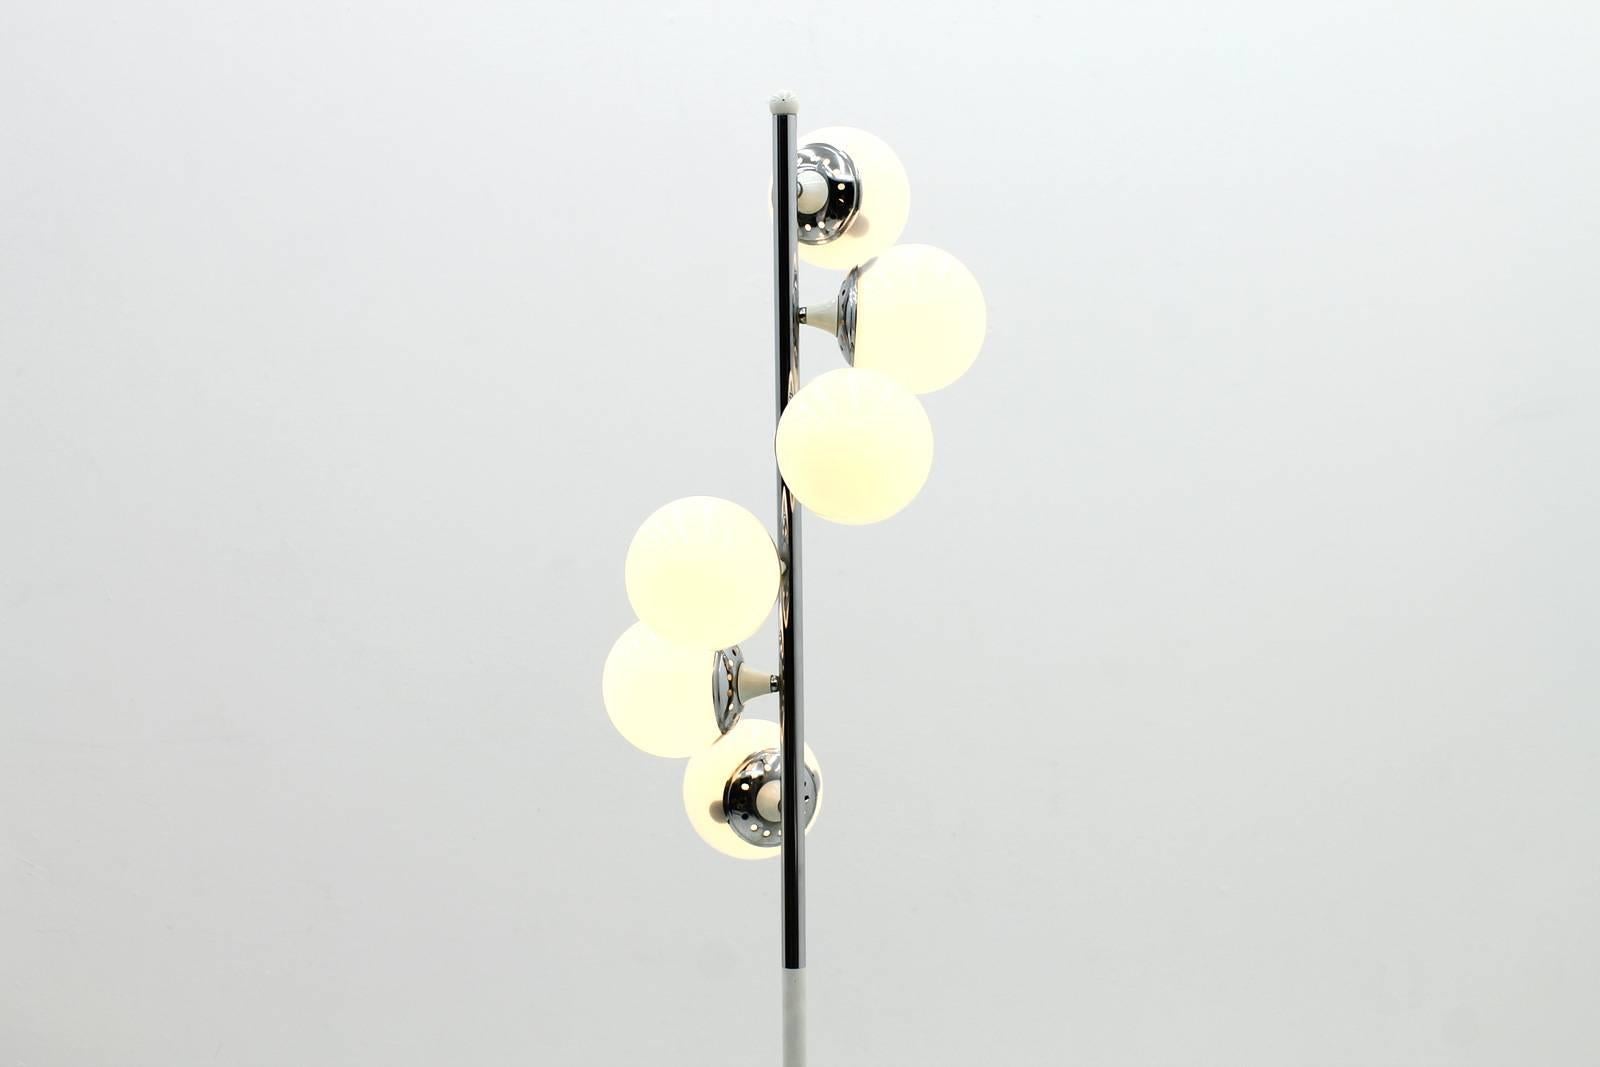 Stilnovo Floor Lamp with Carrara Marble and Chrome, Italy 1960`s.
Good condition.

Worldwide shipping.